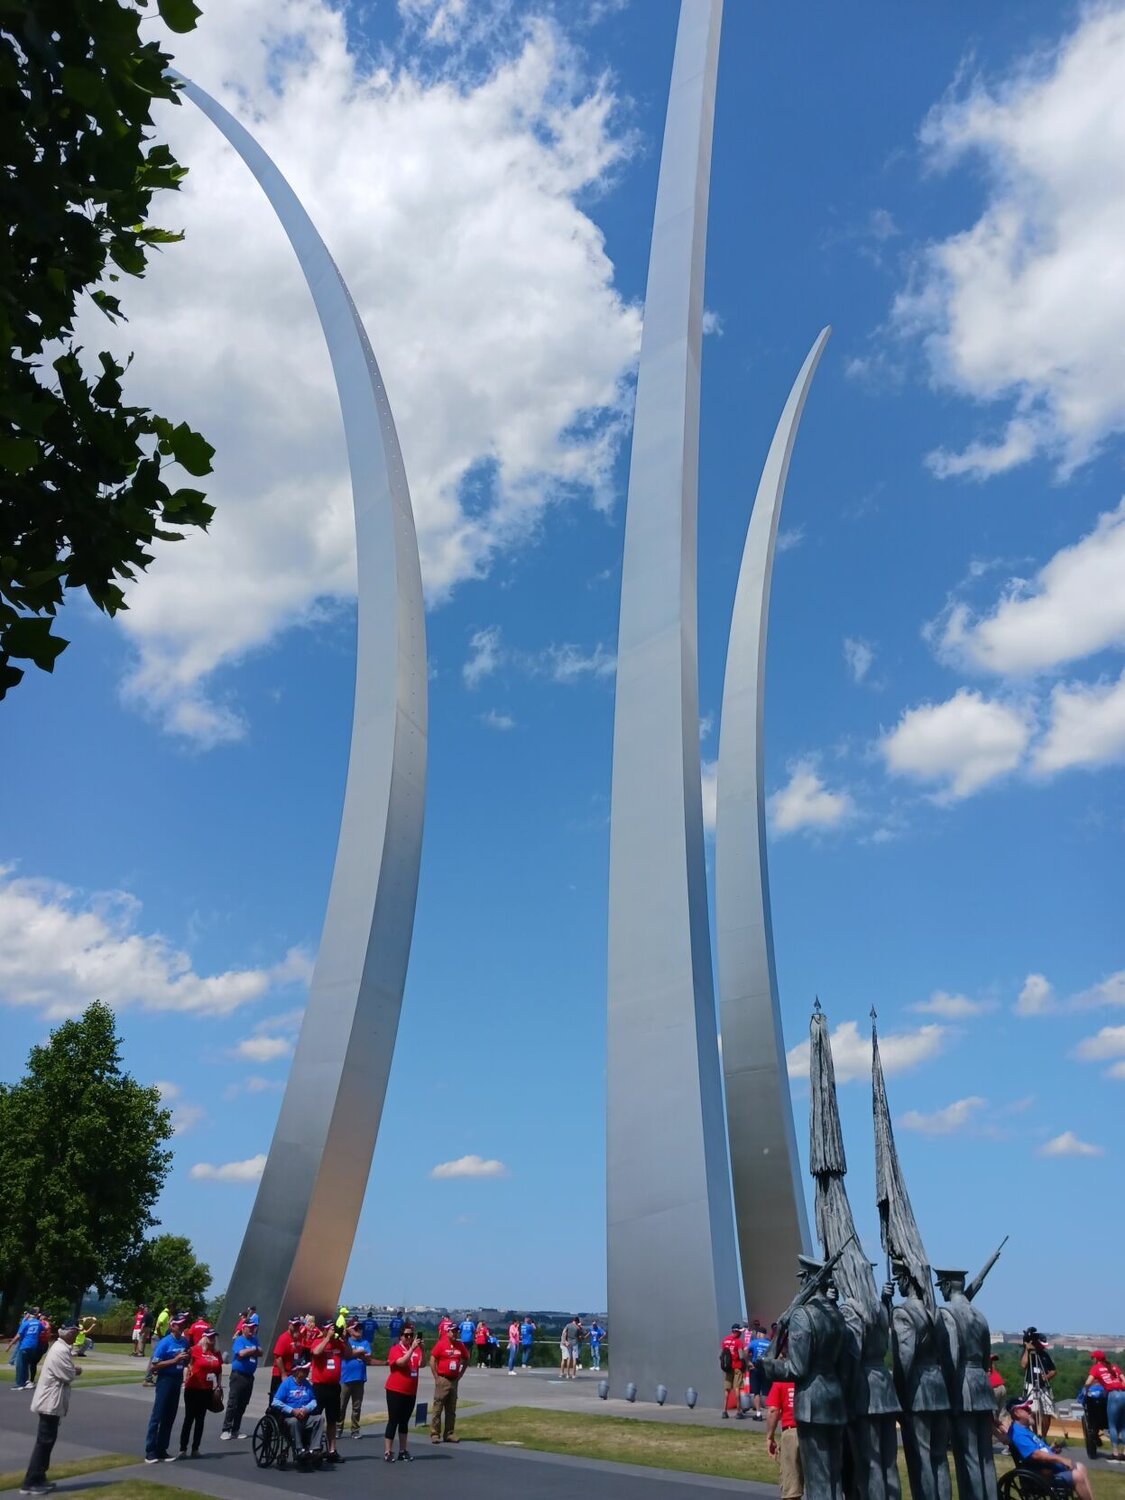 The Honor Guard sculpture acts as a human complement to the steel spires of the Air Force Memorial. CONTRIBUTED PHOTO